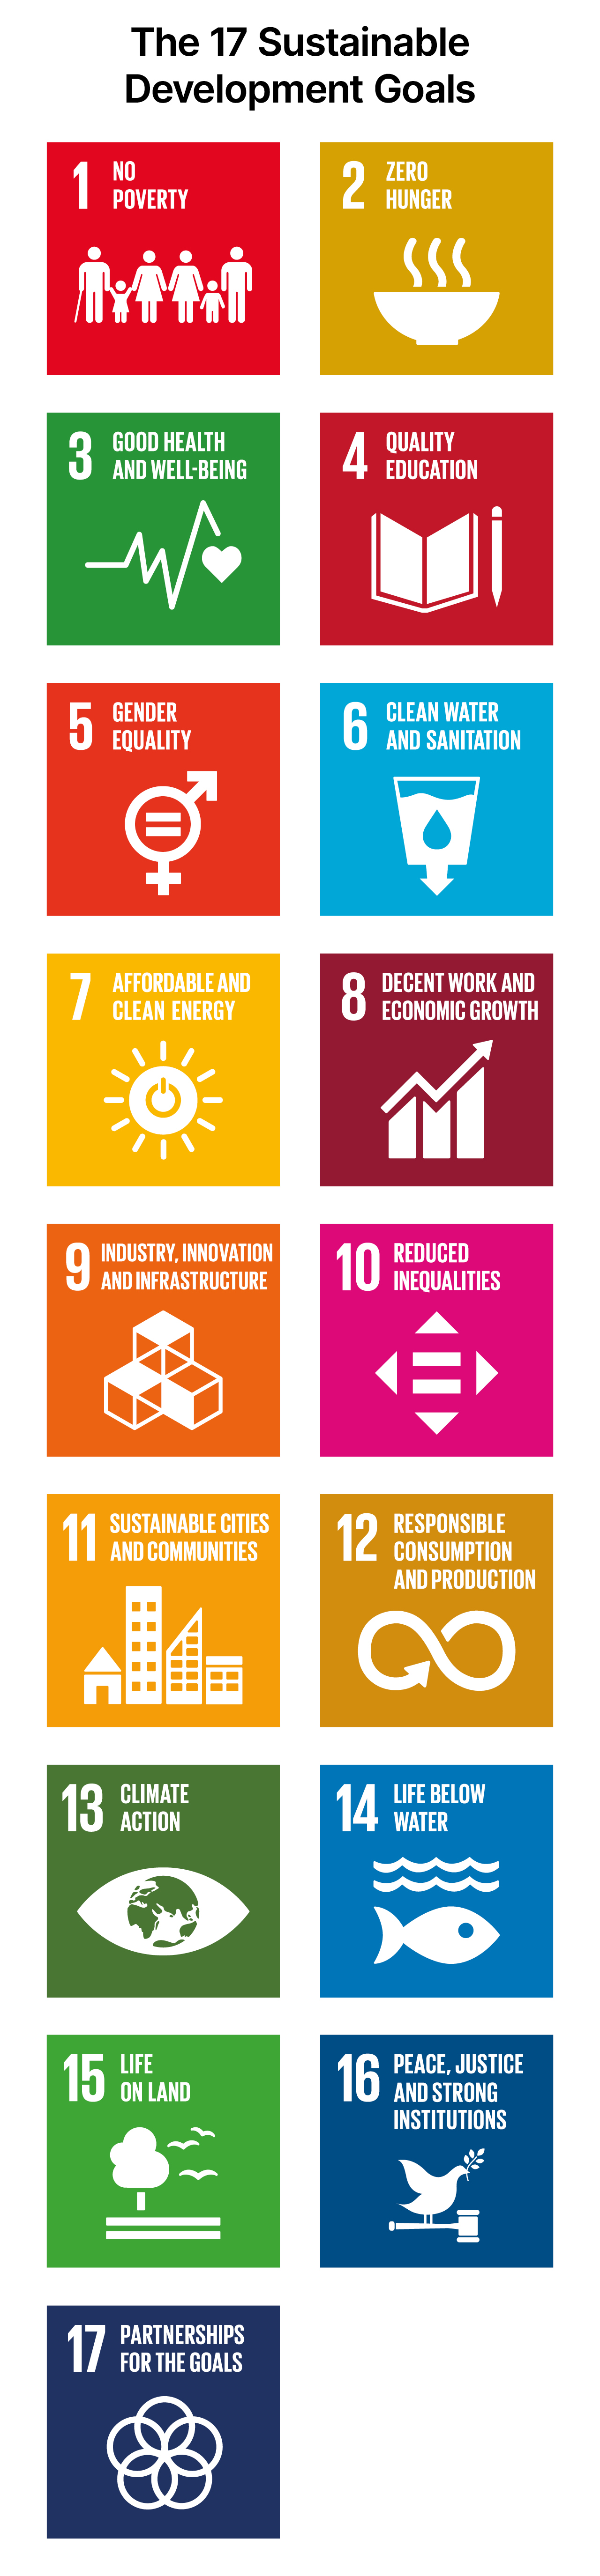 Icons showing the 17 UN sustainable development goals 